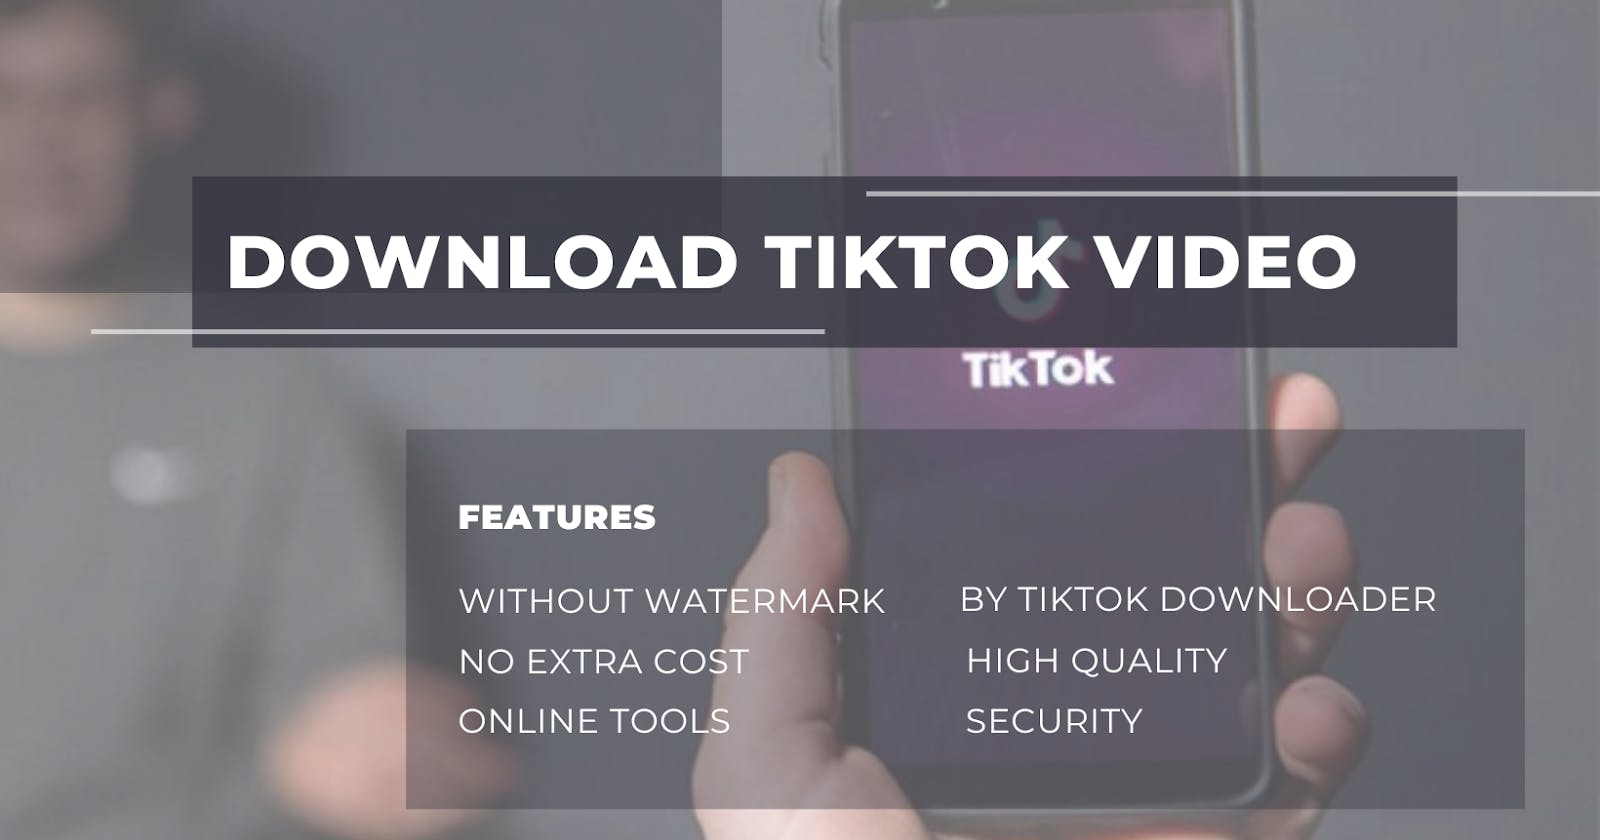 4 tips for downloading TikTok videos without watermarks that experts often use